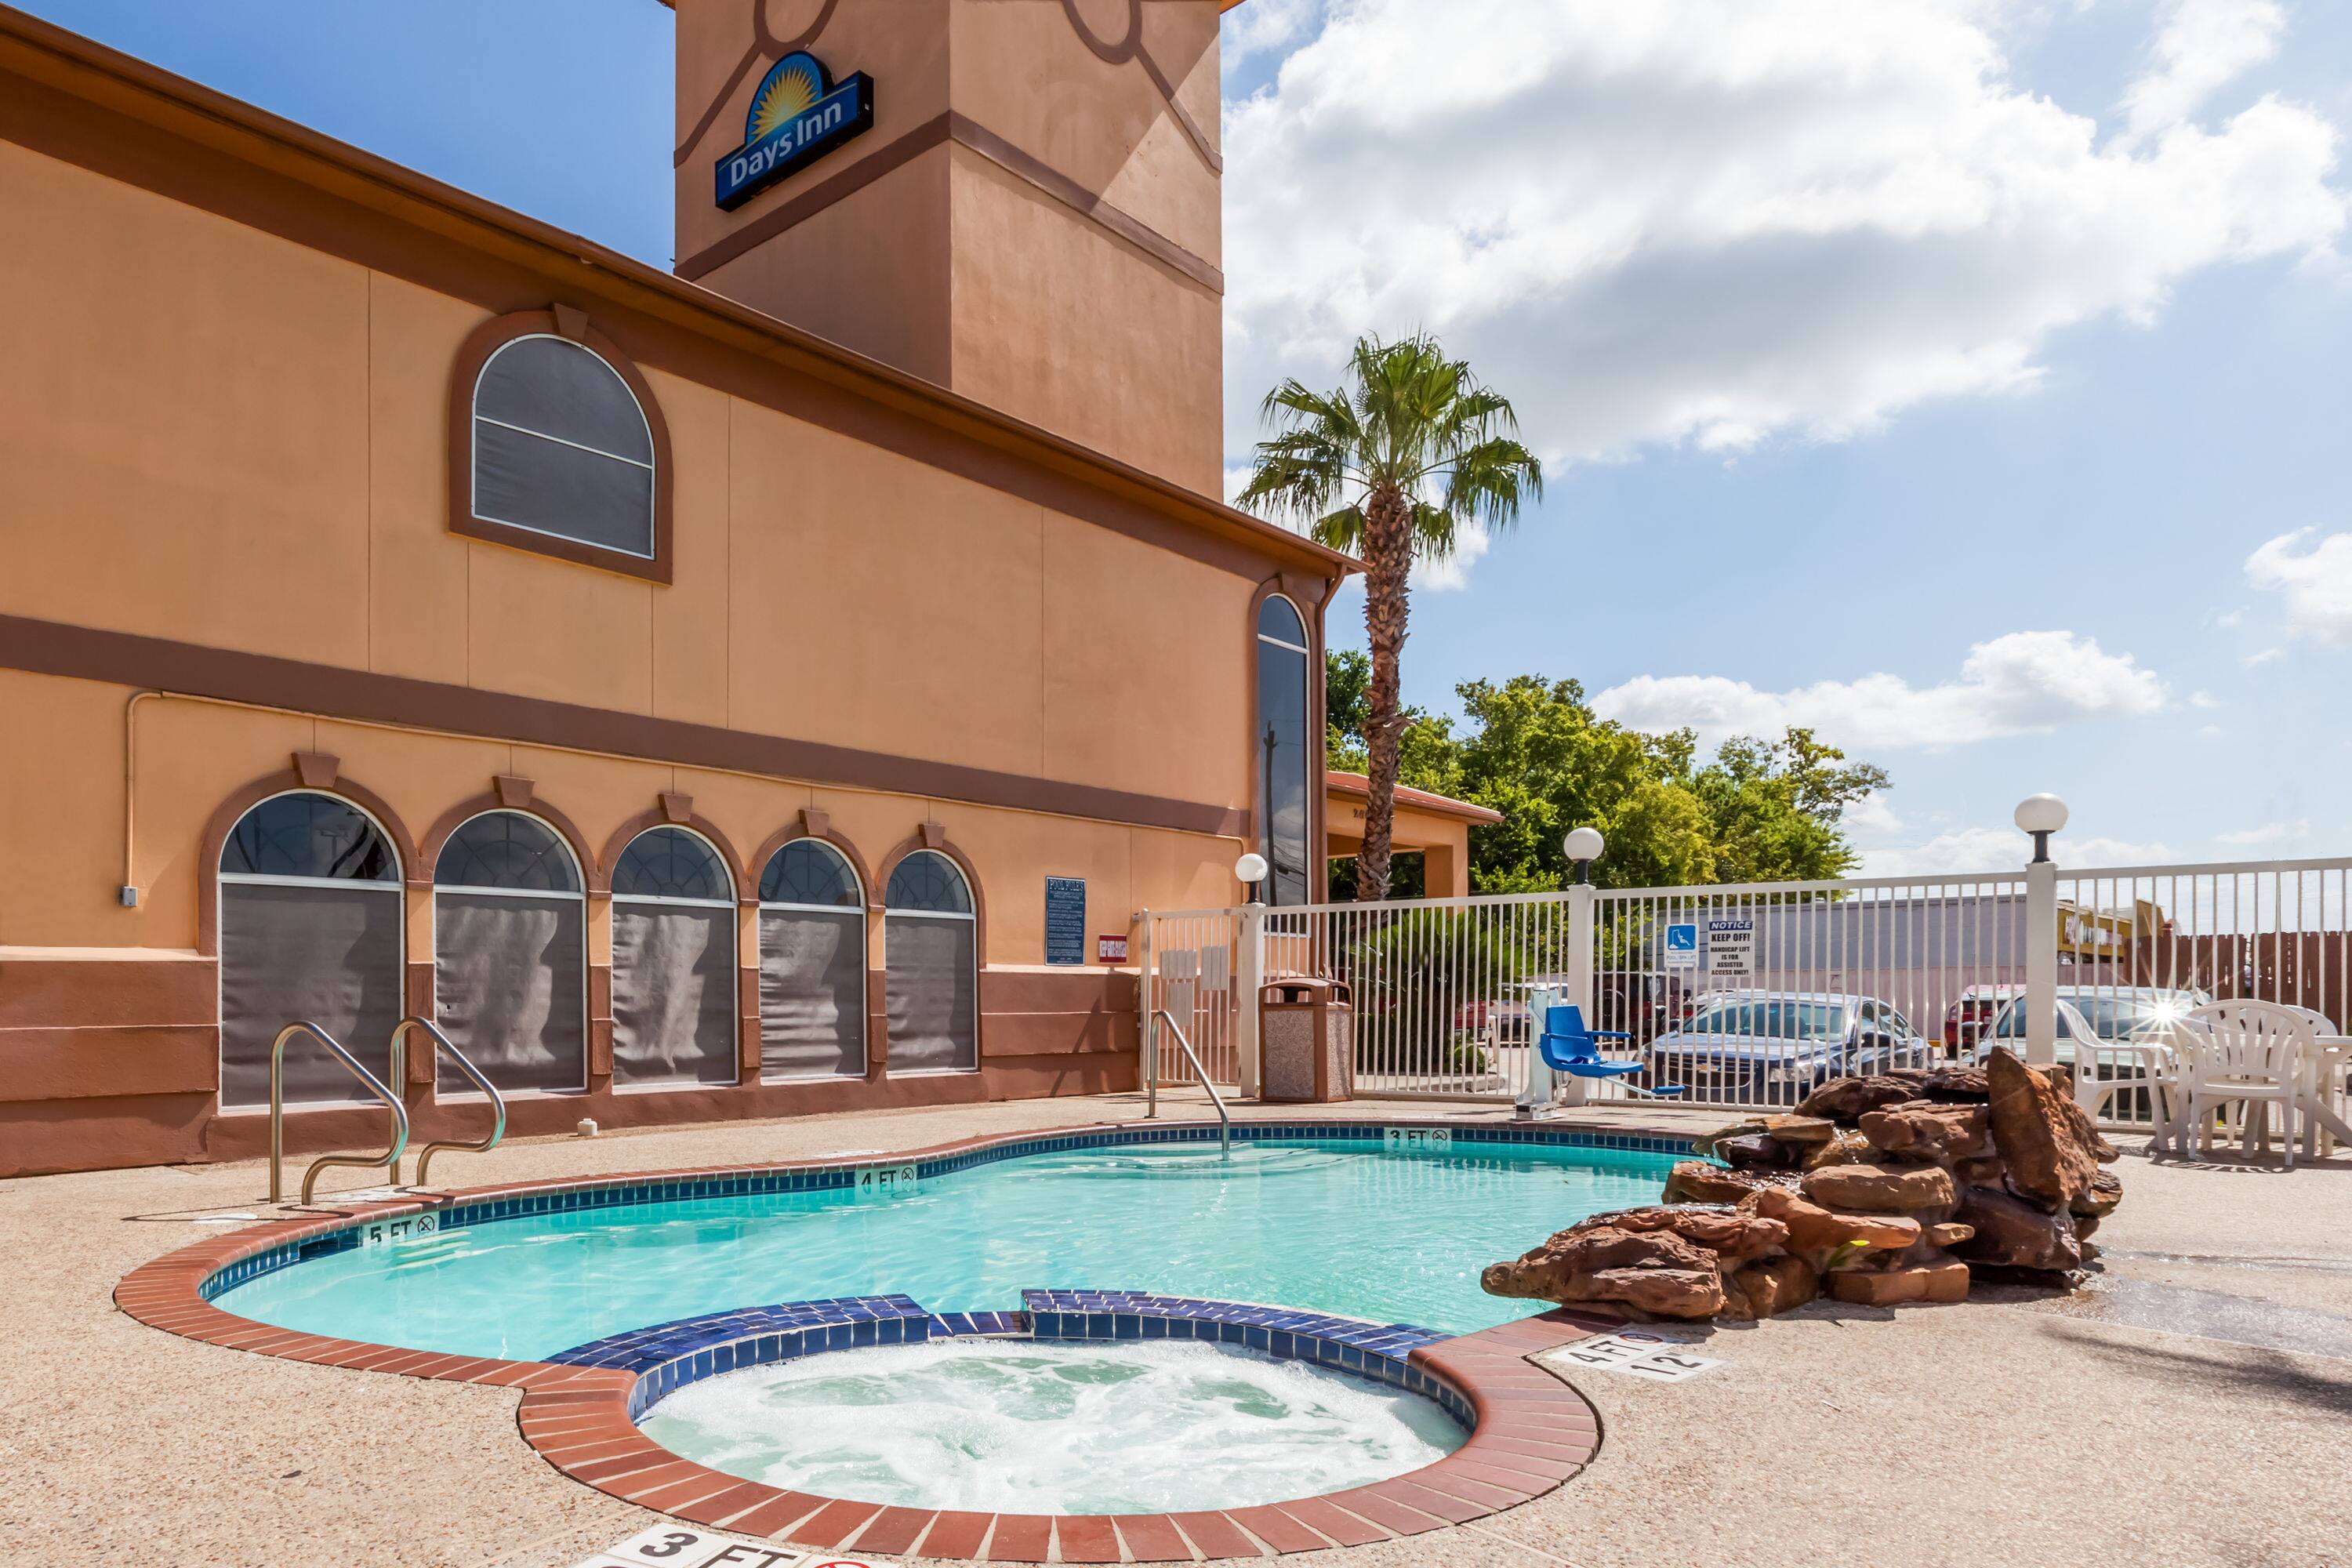 Promo [85% Off] Holiday Inn Express Suites Sterling United States - Hotel Near Me | A Good Hotel ...